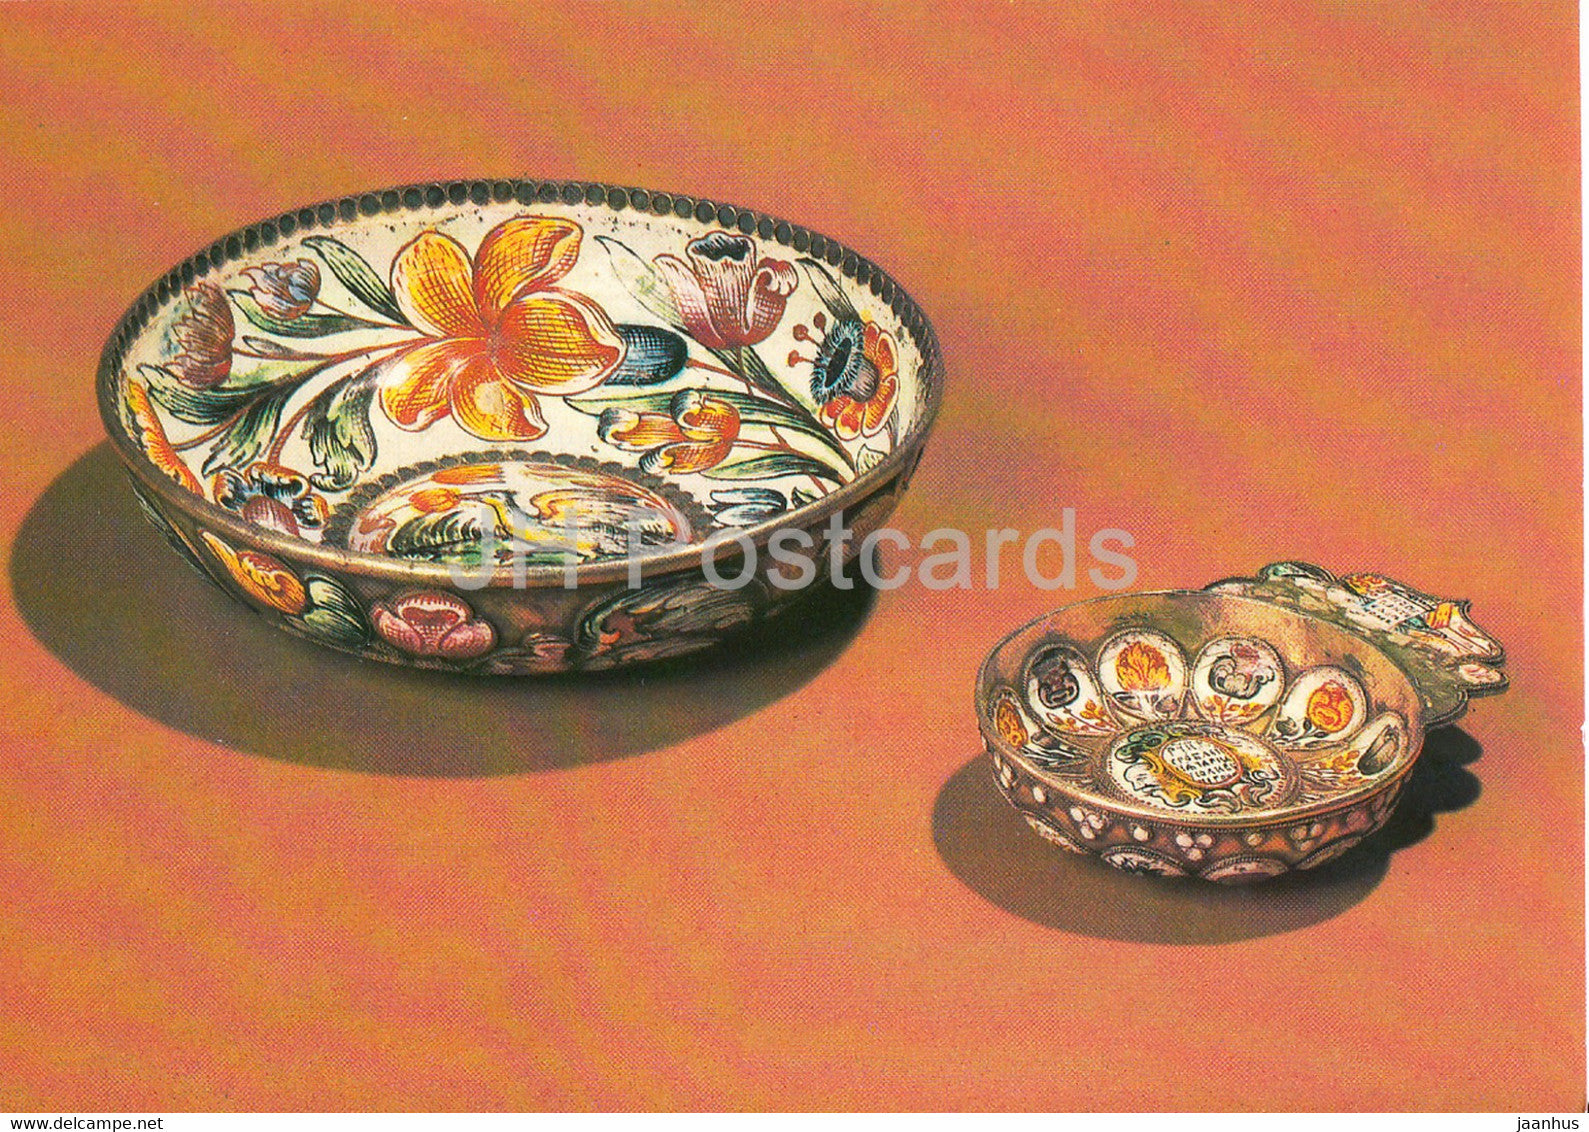 Gold and Silverwork in old Russia - Bowl and one-handel wine cup, 17th Century - 1983 - Russia - USSR - used - JH Postcards